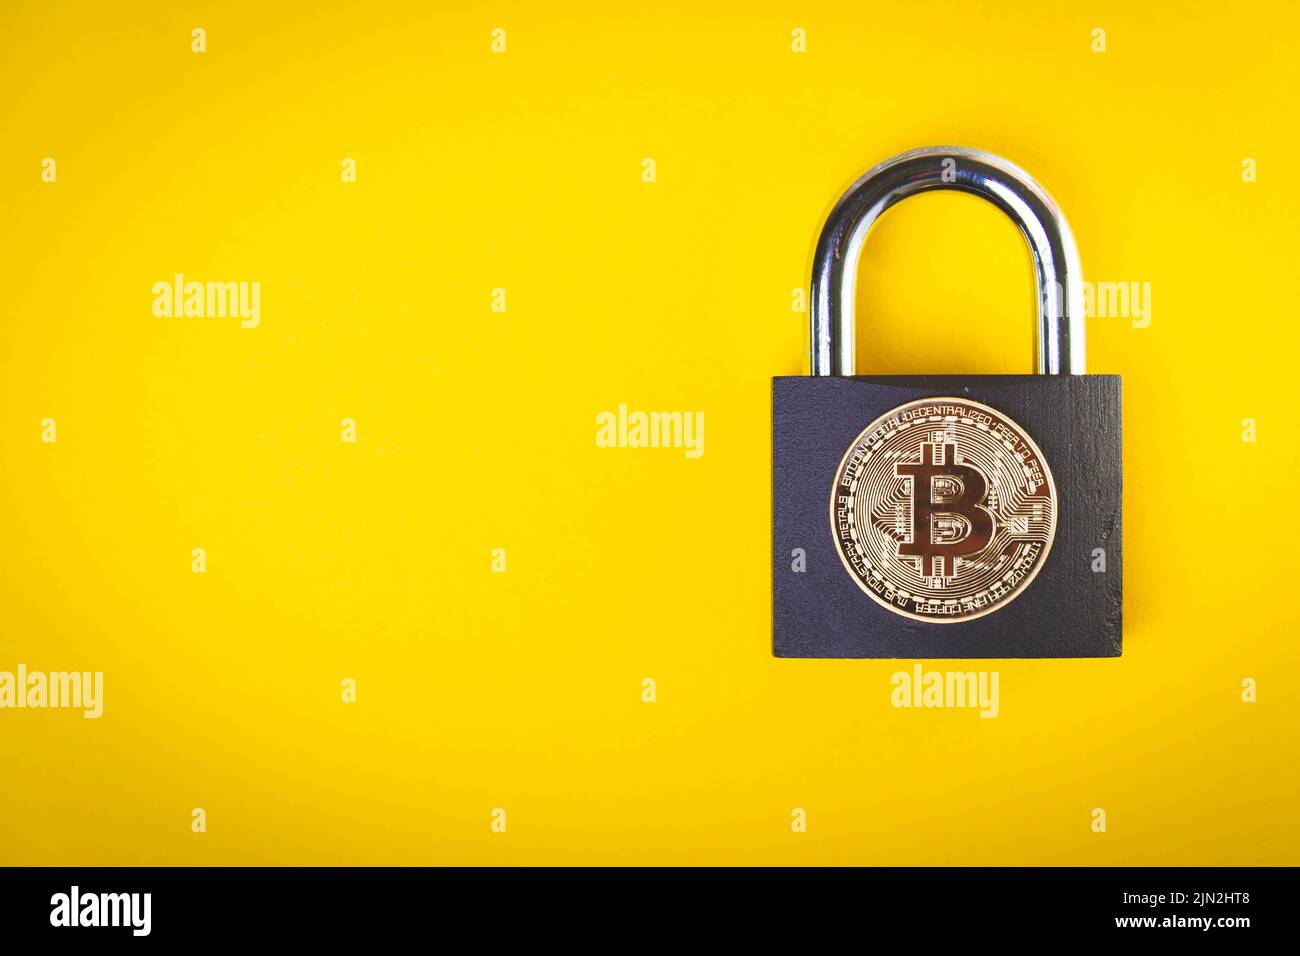 Cryptocurrency is banned. bitcoin transfer ban. Rate drop. Bitcoin coin and padlock on yellow background. Stock Photo